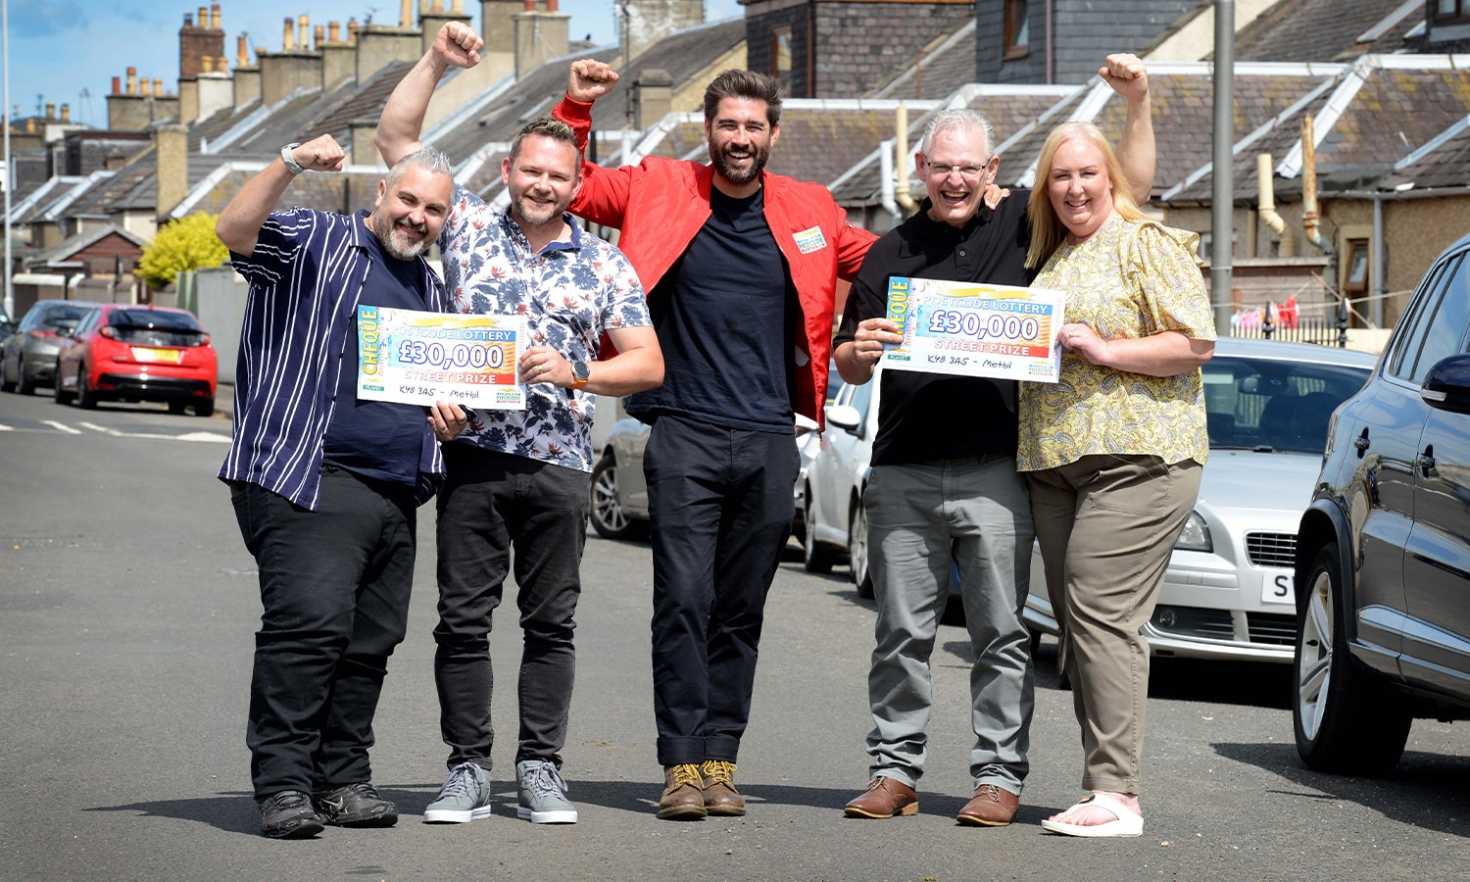 Matt has some amazing £30,000 Street Prizes for today's lucky winners in Methil